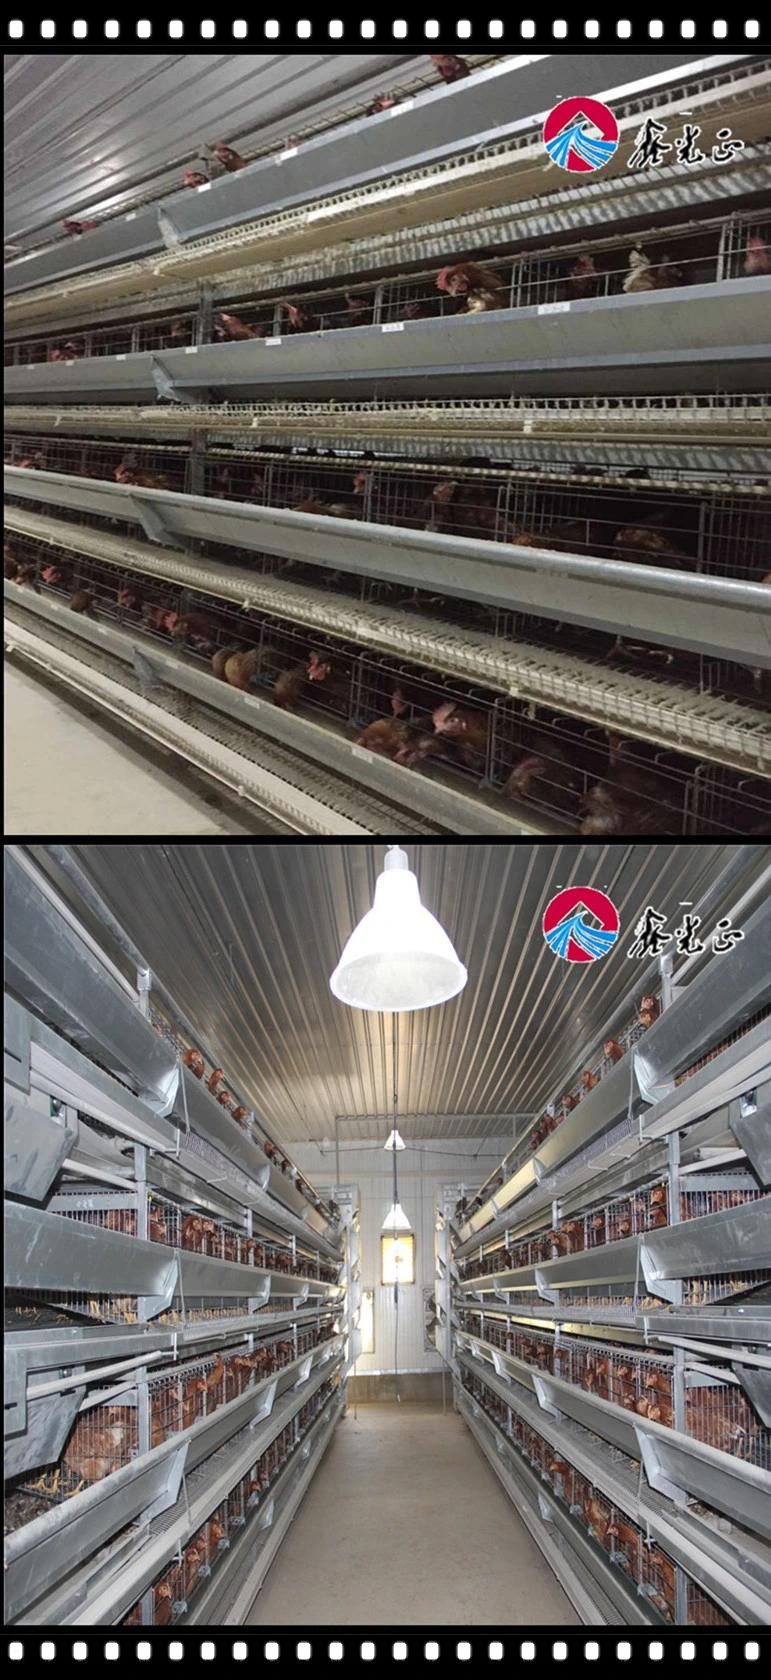 Machinery Type H Chicken Cage and Layer Automatic System Poultry Farms